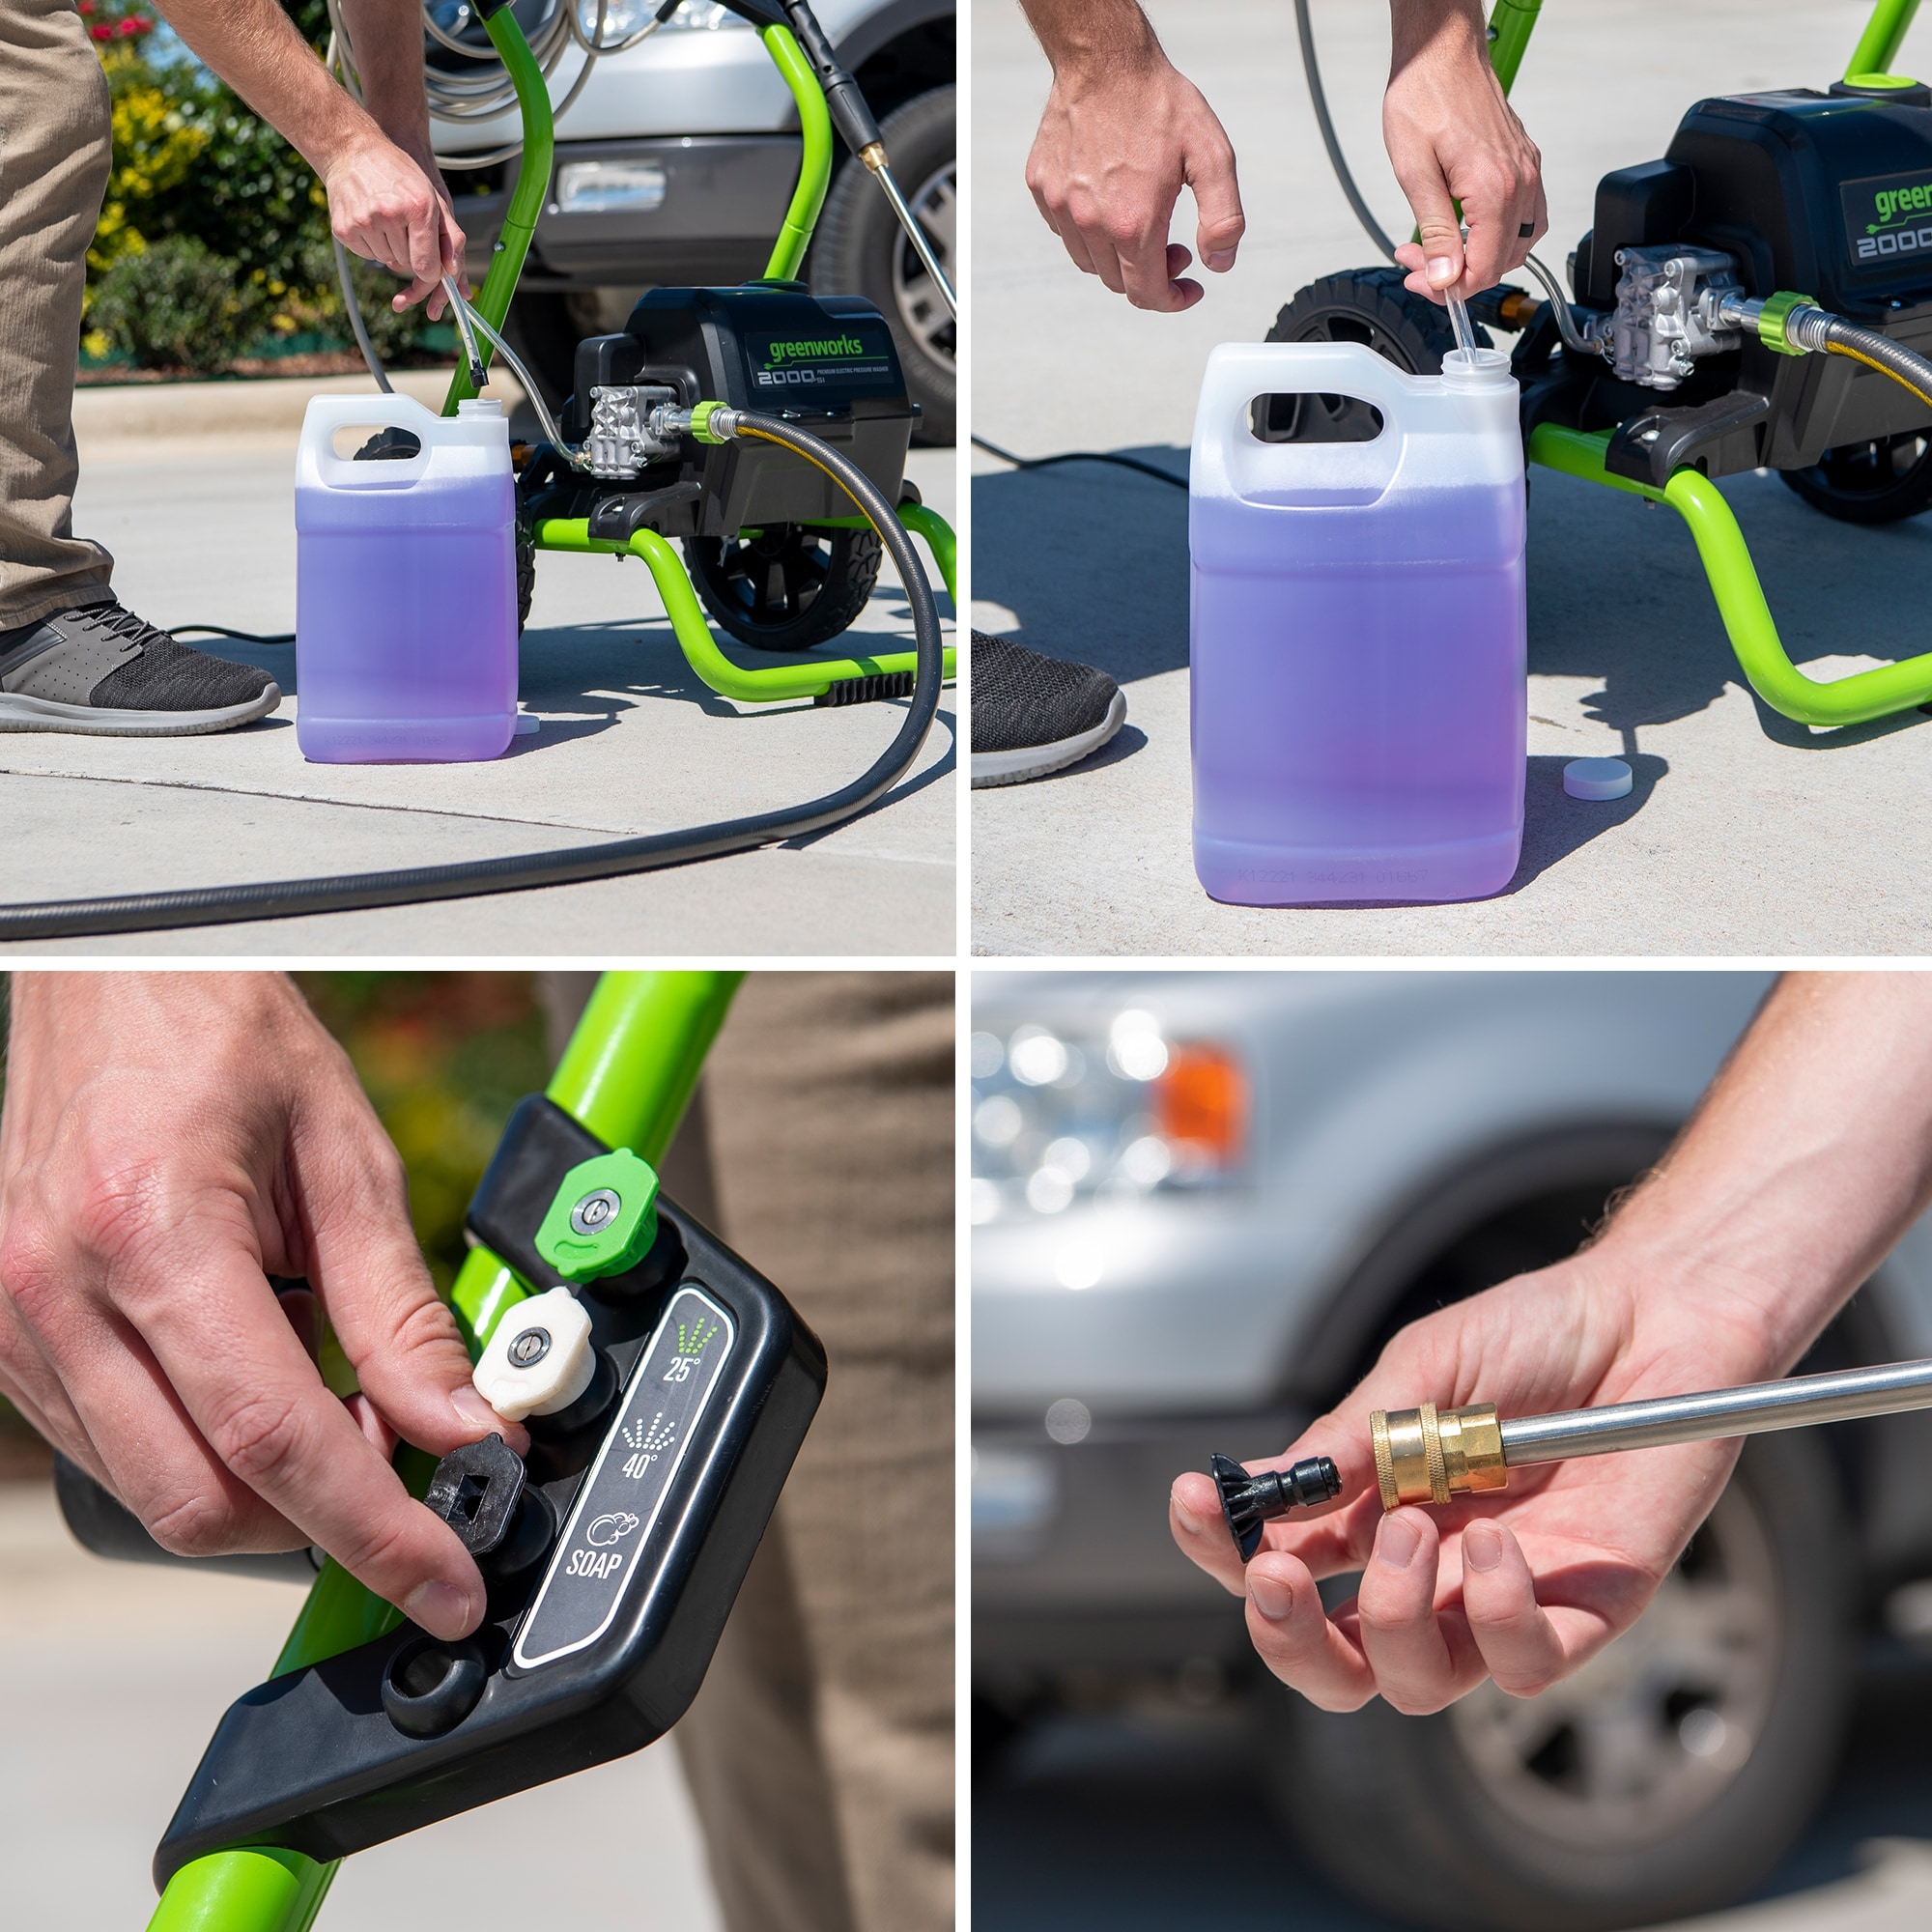  Greenworks 2000 Max PSI @ 1.1 GPM (13 Amp) Electric Pressure  Washer GPW2000-1RB + Greenworks Surface Cleaner Universal Pressure Washer  Attachment 30012 + Greenworks High Pressure Soap Applicator 51362 : Patio,  Lawn & Garden